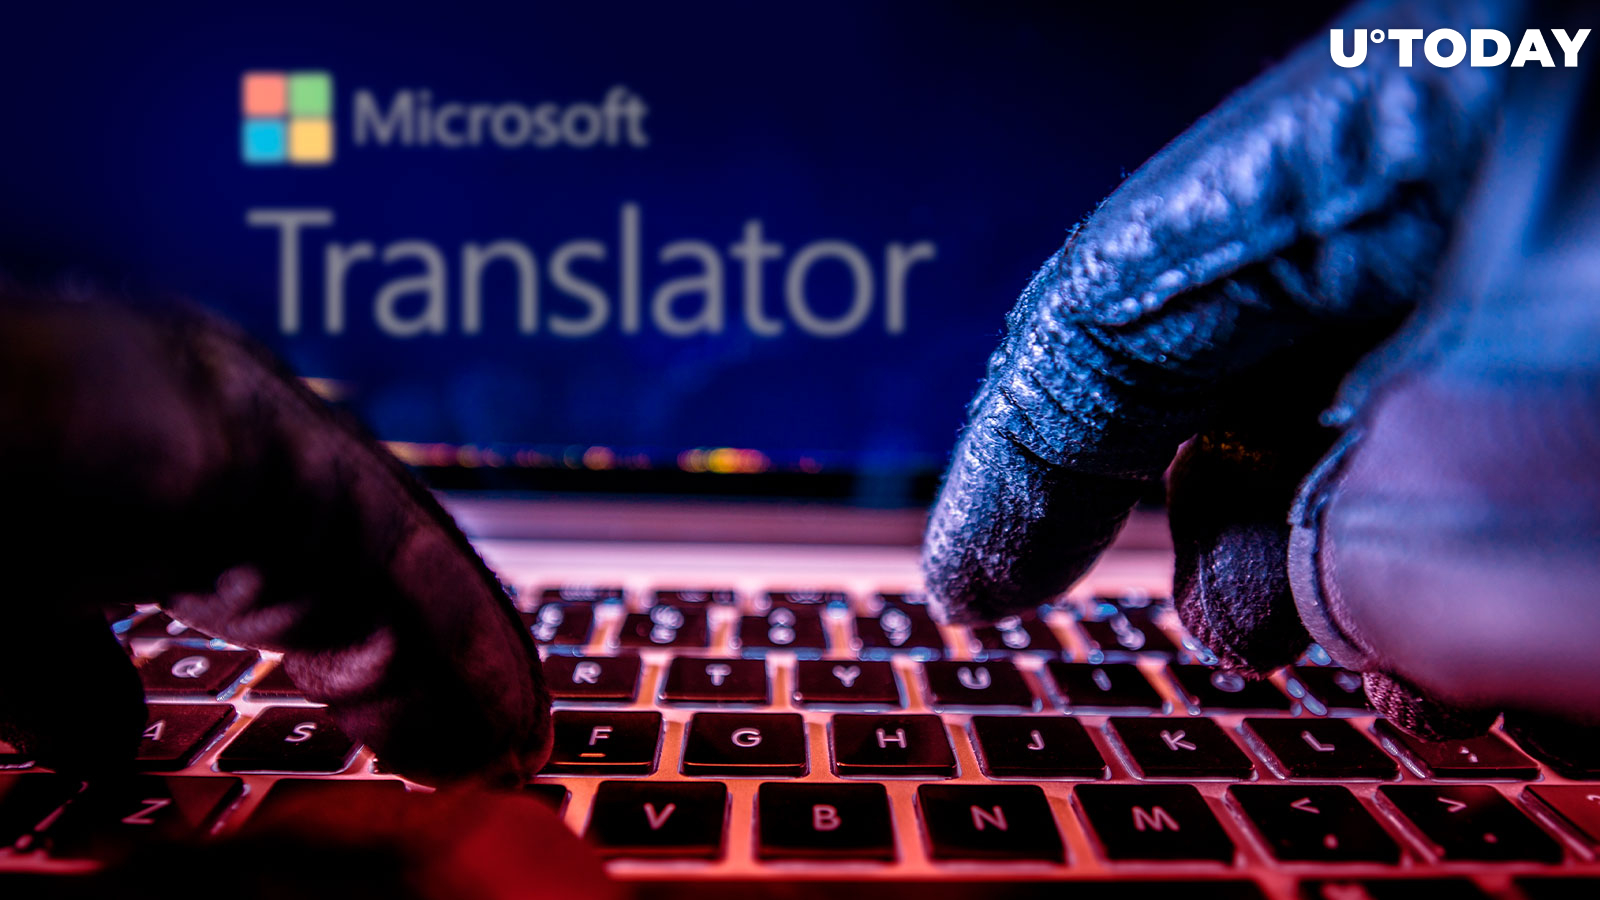 Crypto Mining Malware Masquerades as Microsoft Translator, Infects More Than 100,000 Users